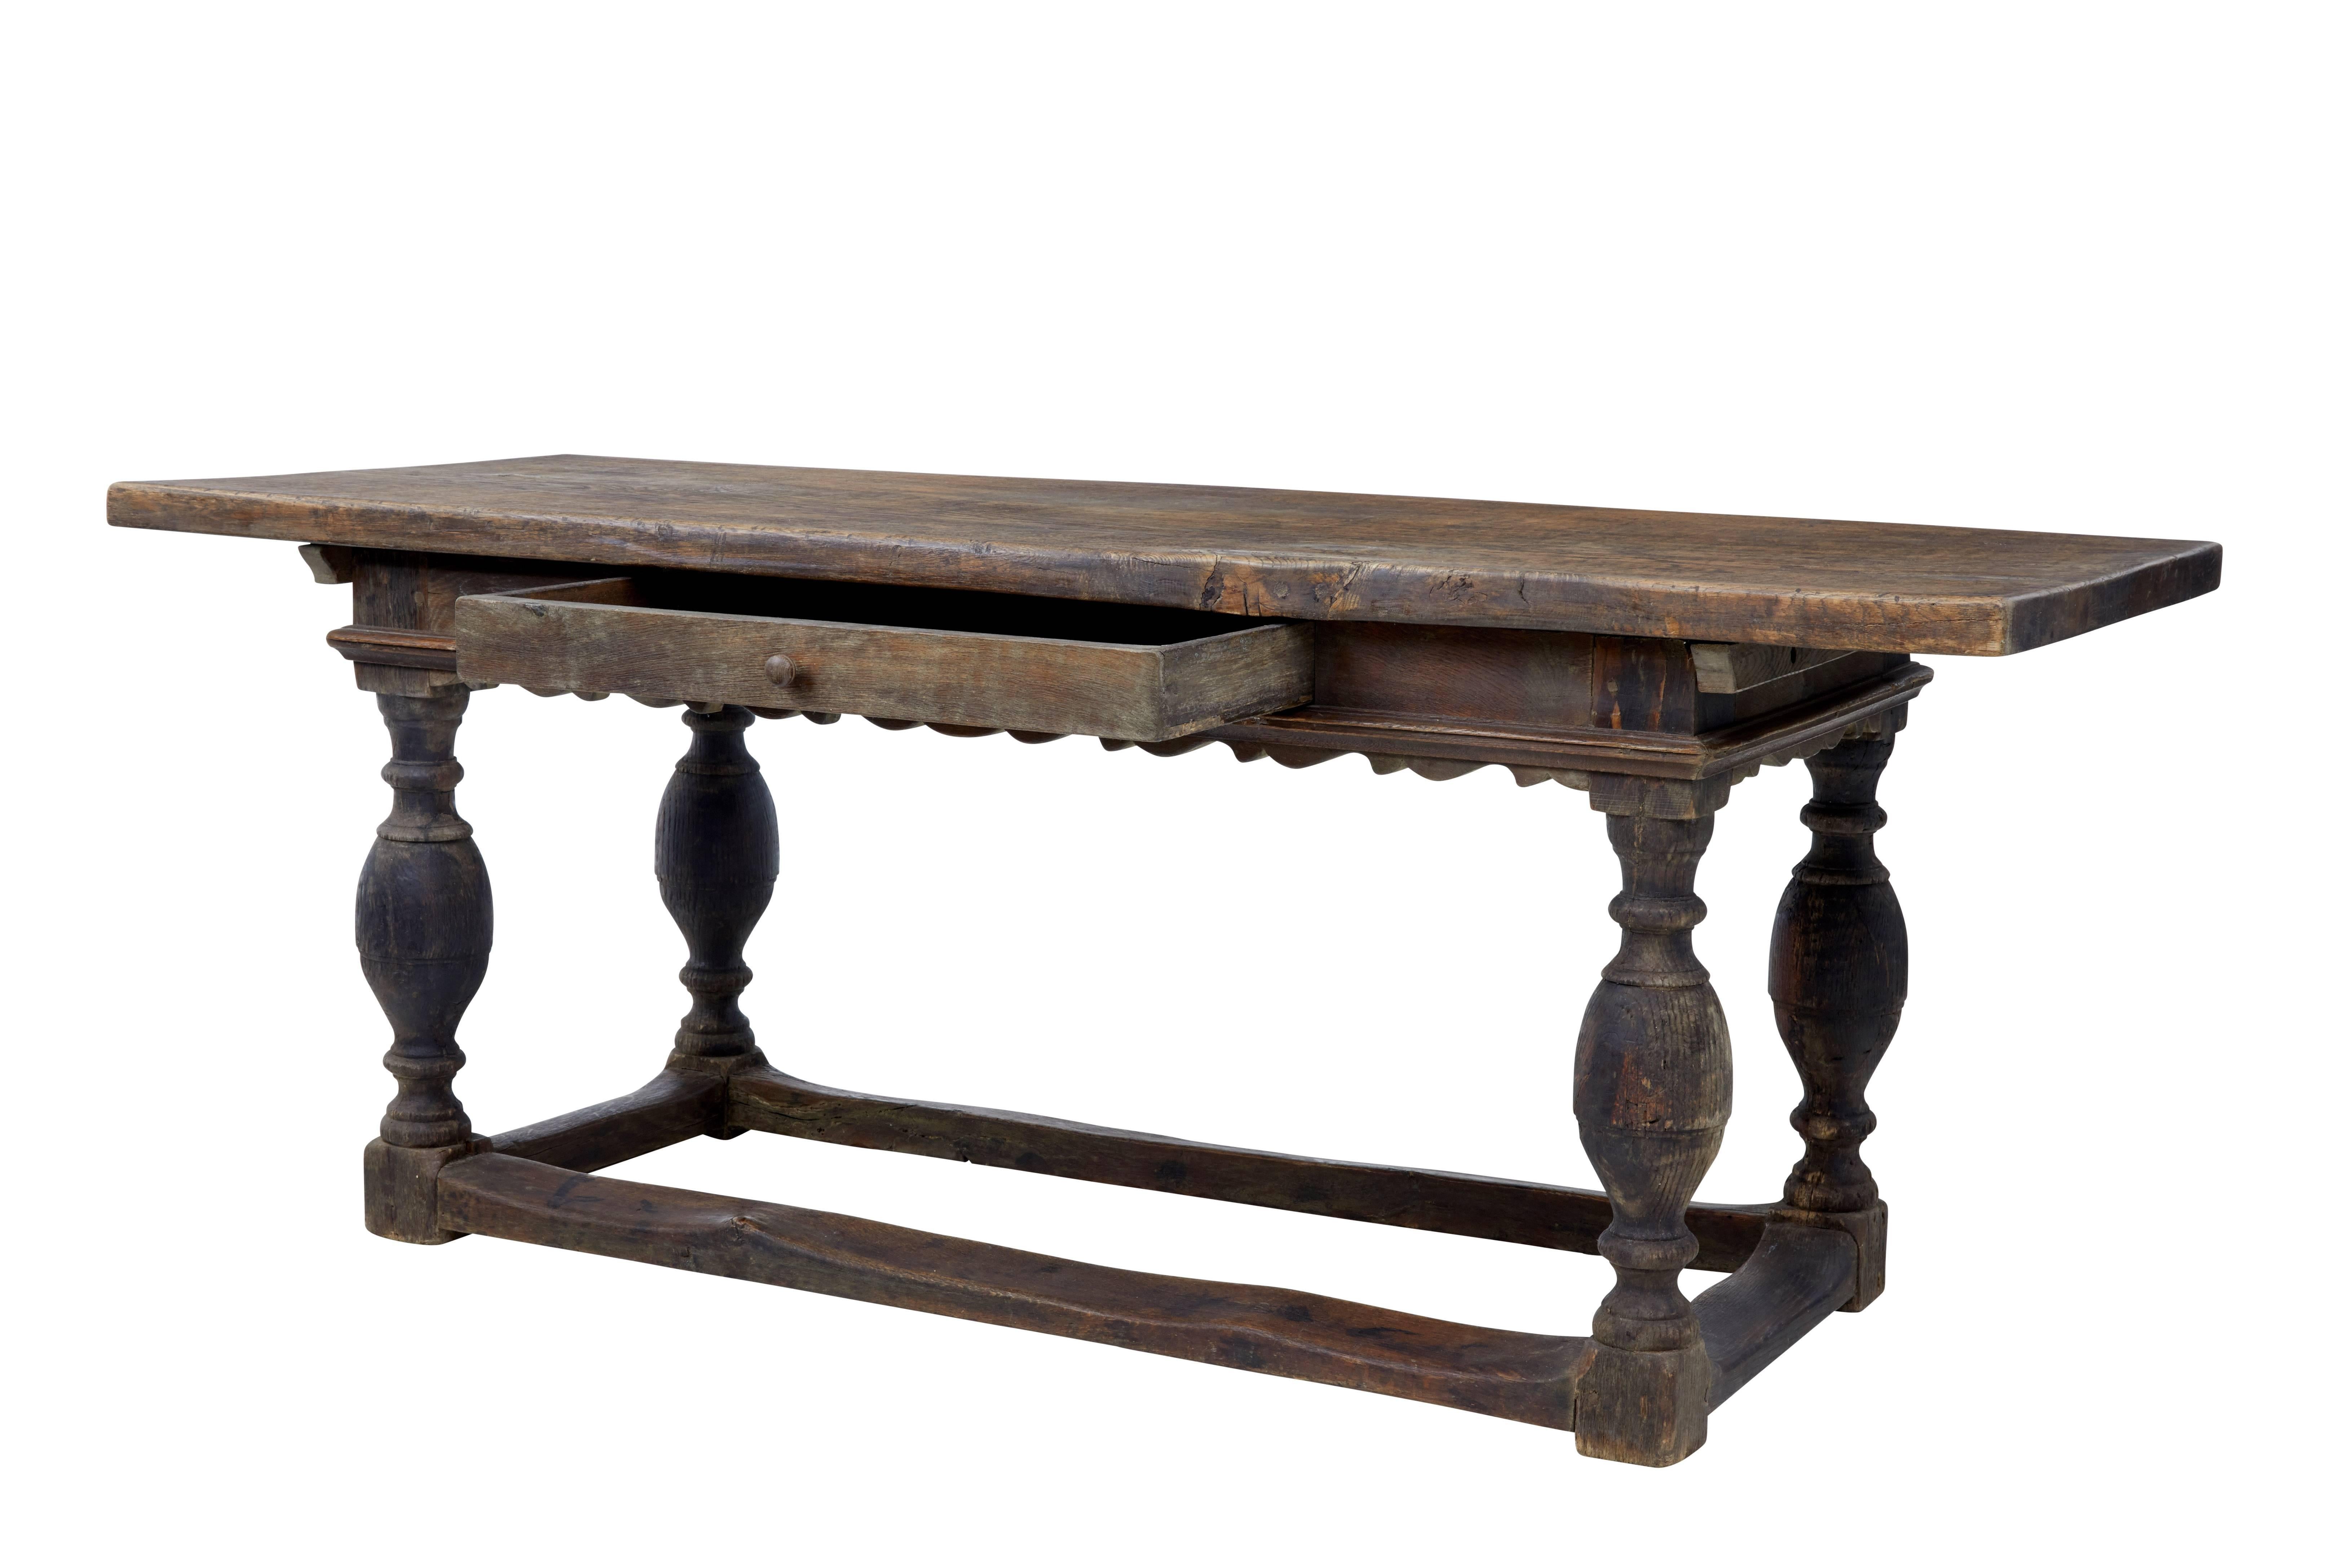 Quality Scandinavian oak table, circa 1760.

We are pleased to offer this table in untouched original condition.

Near 2 inch thick solid oak top, held in place on the base by barers and pegs.

Shaped apron above the knee with a single deep